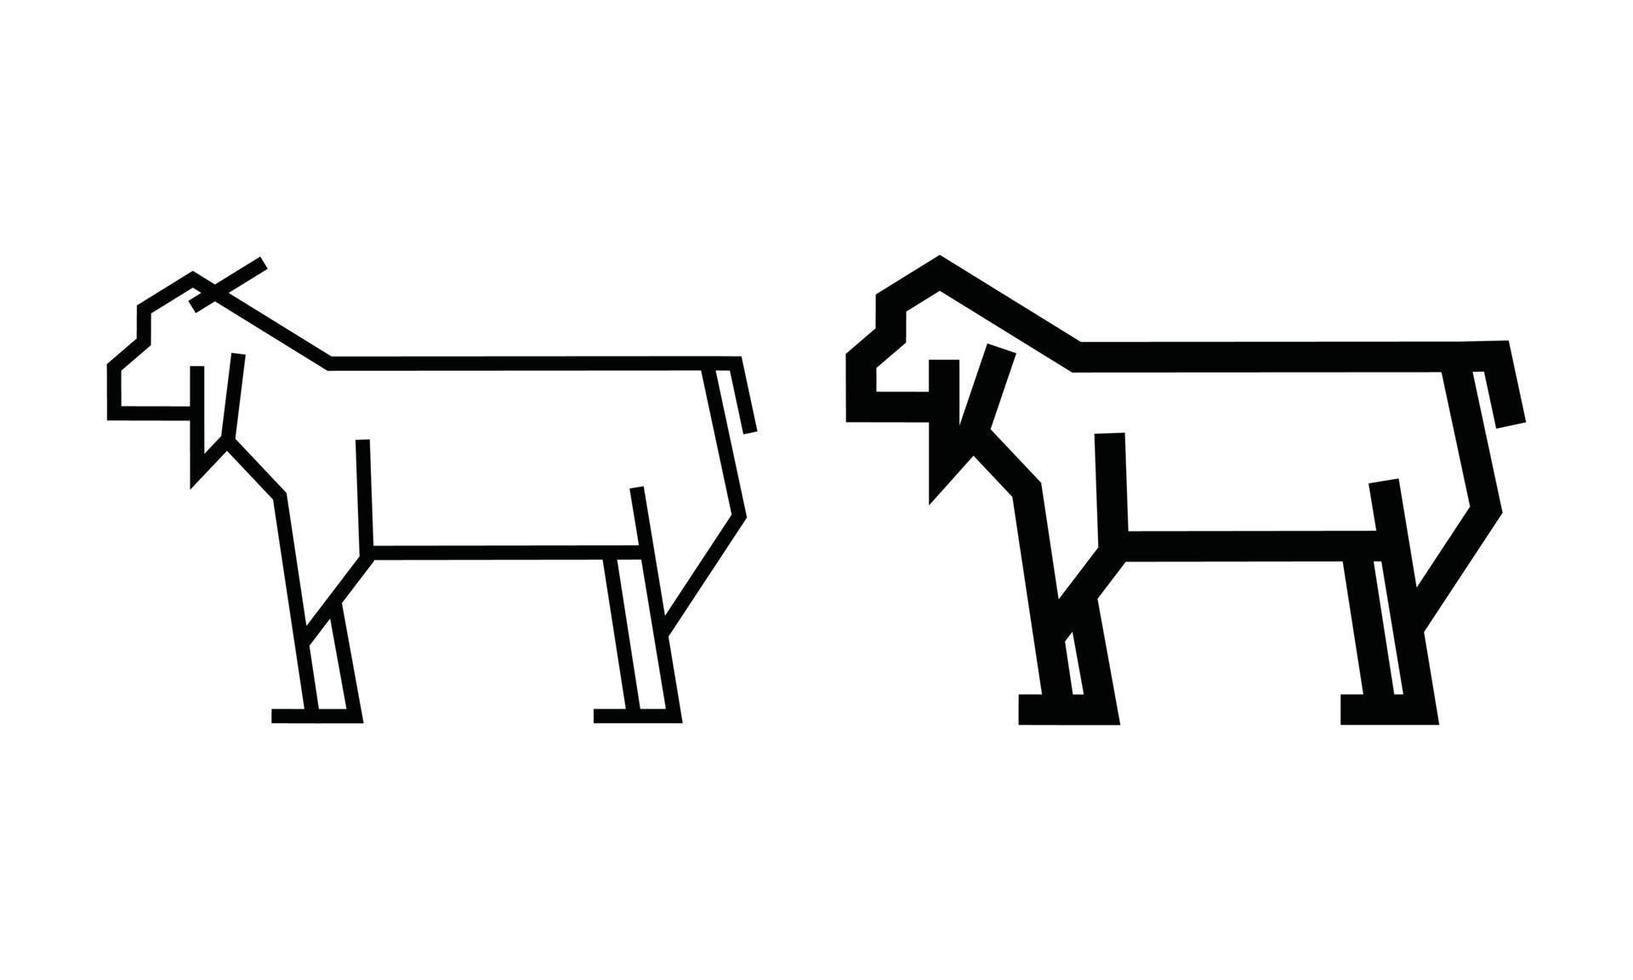 goat line art vector illustration isolated on white background. minimal outline icon for simple animal logo concept.